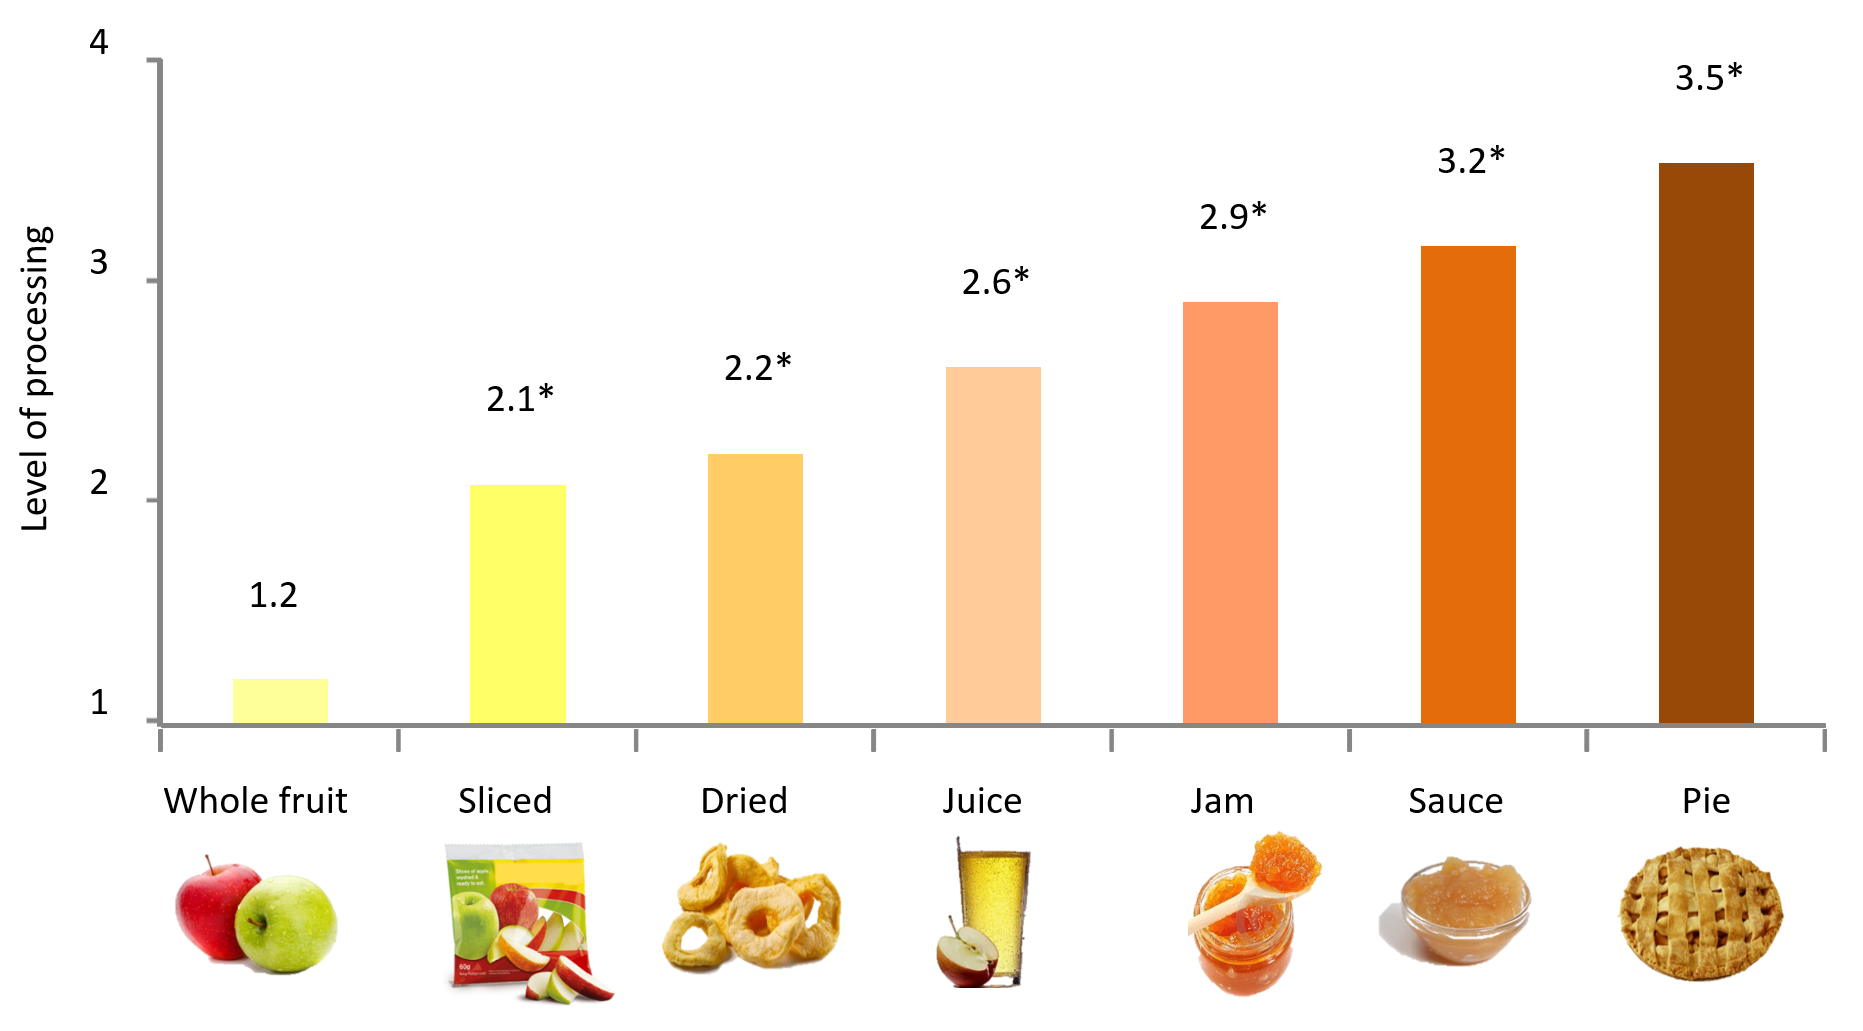 illustrated bar chart showing the level of processing on the y axis, and the product (whole fruit, sliced, dried, juice, jam, sauce, pie) on the x axis. The scores rise from 1.2 for the whole fruit, to 3.5 for the pie.